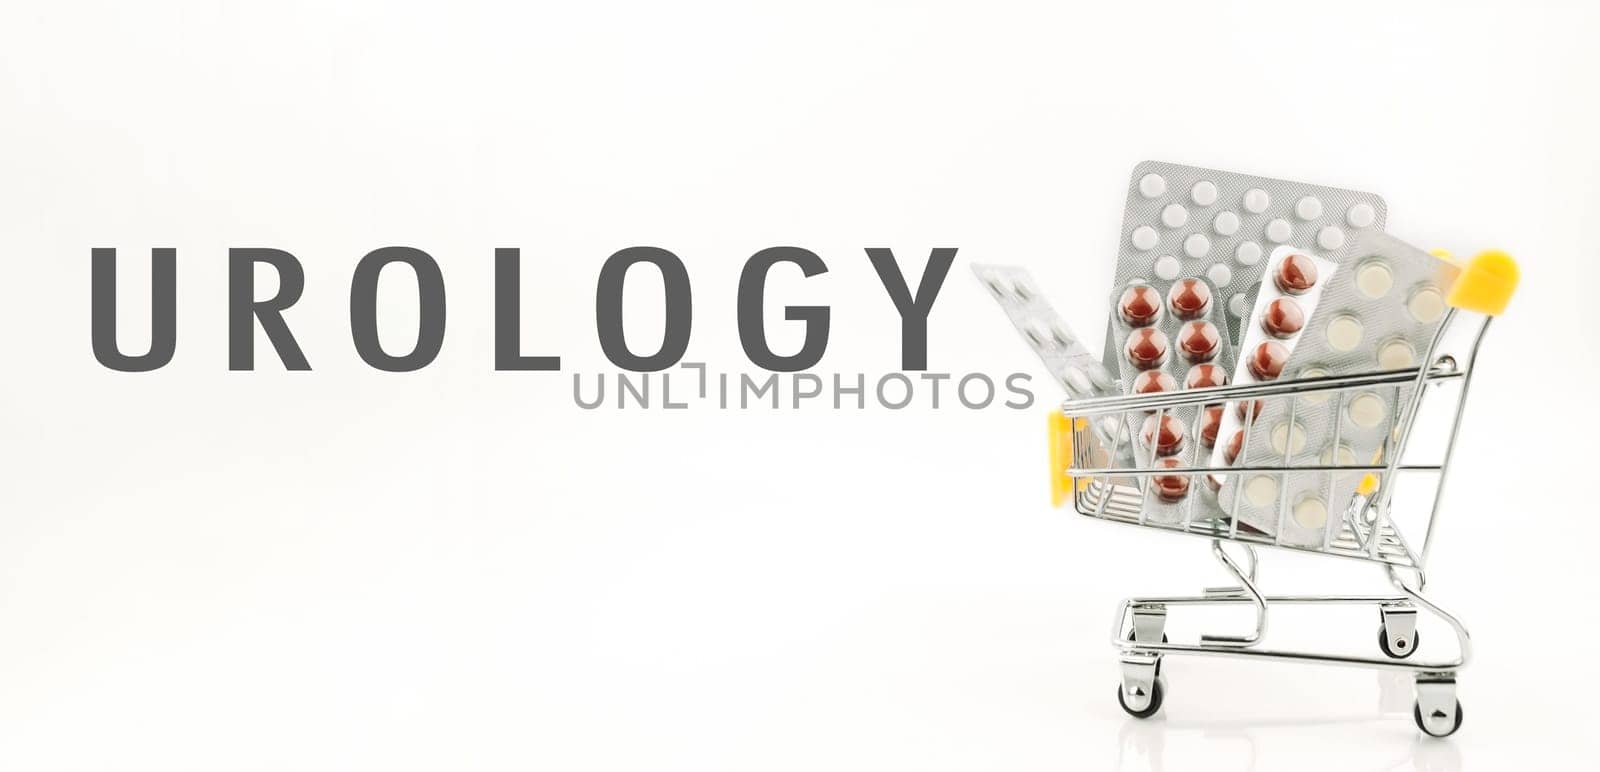 A shopping cart full of medicine for the urinary system. The cart is silver and has a yellow handle